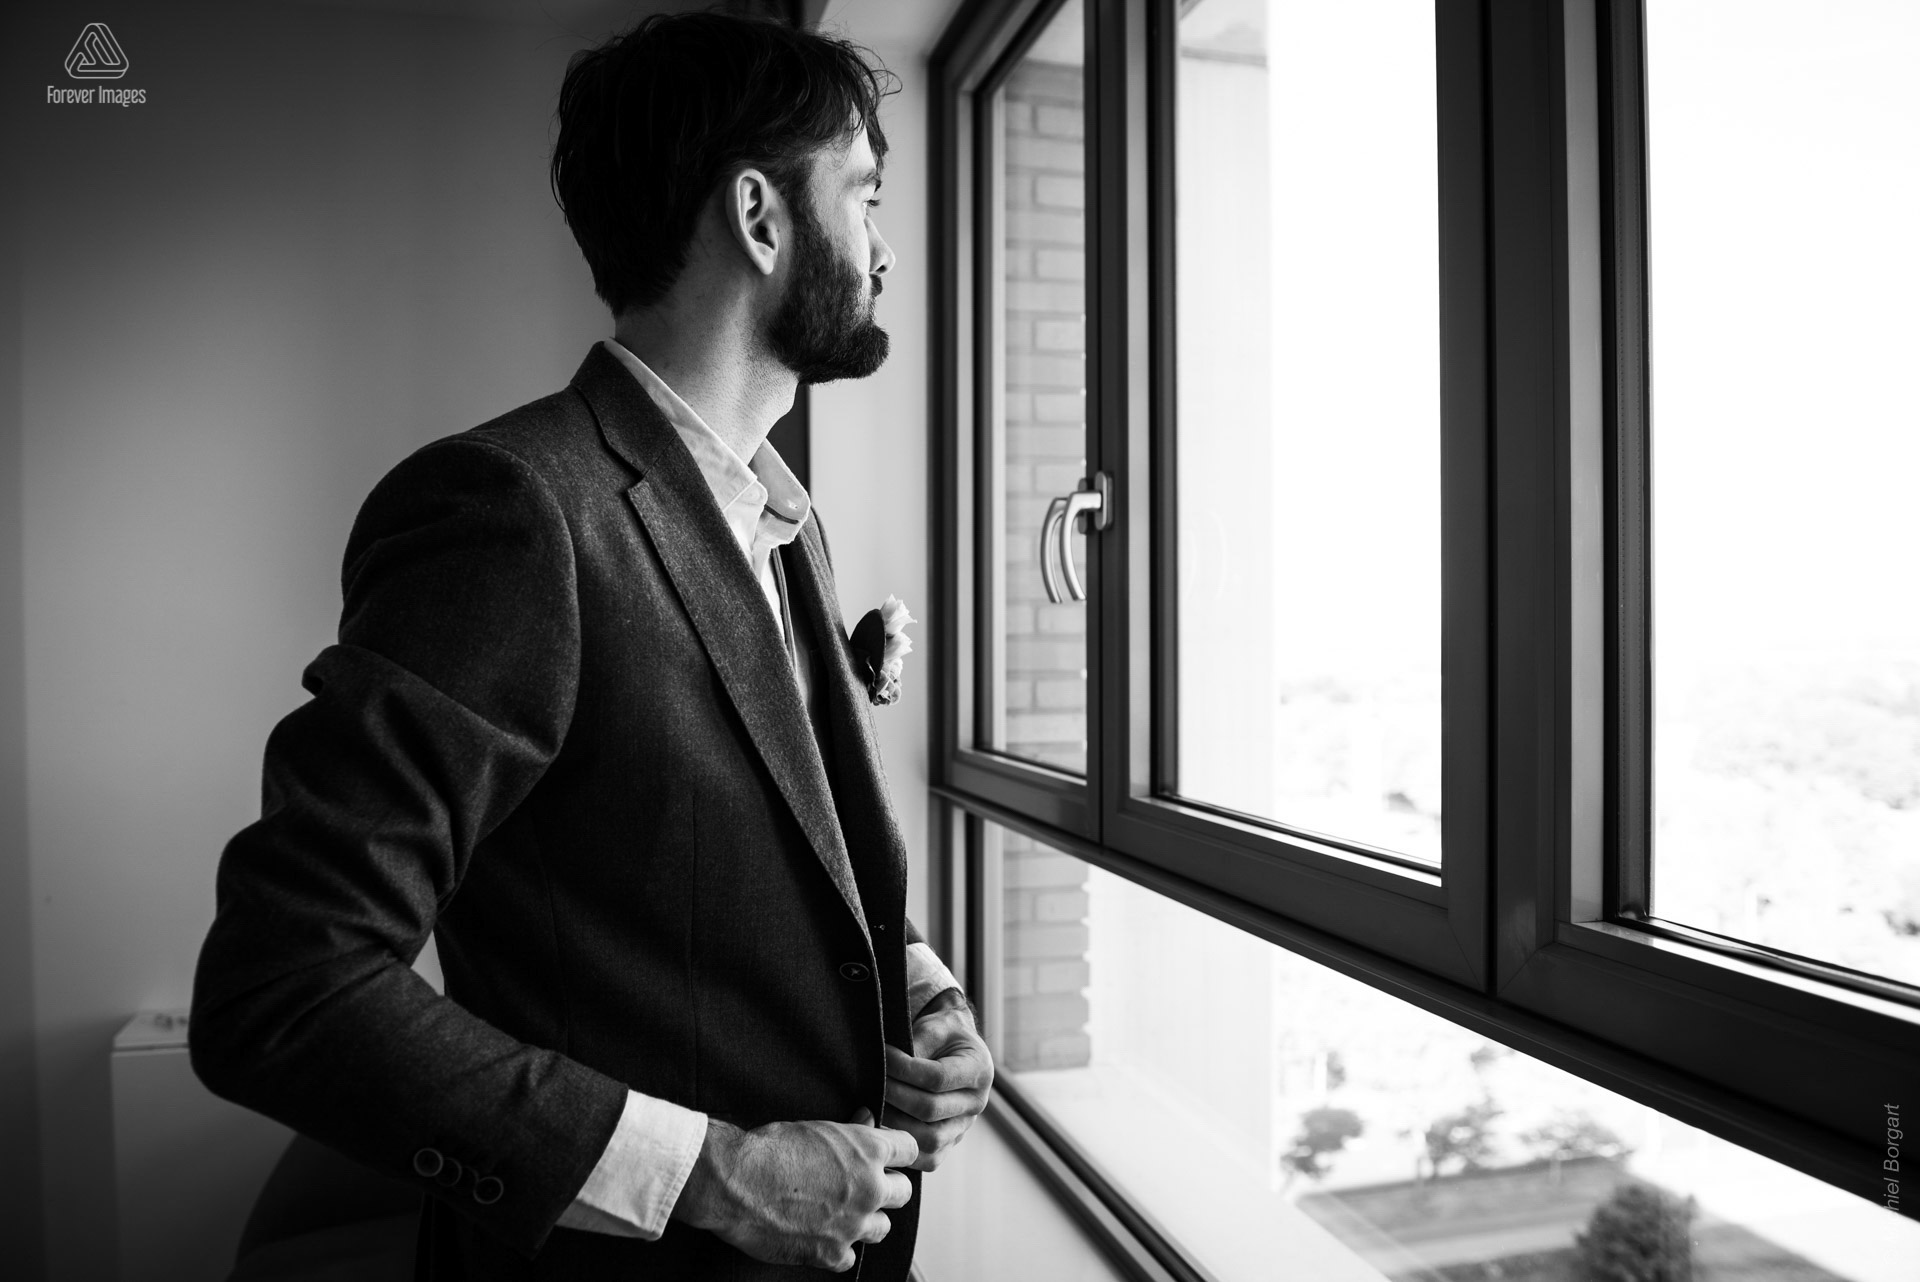 Wedding photo black and white B&W groom on his own | Wedding Photographer Michiel Borgart - Forever Images.